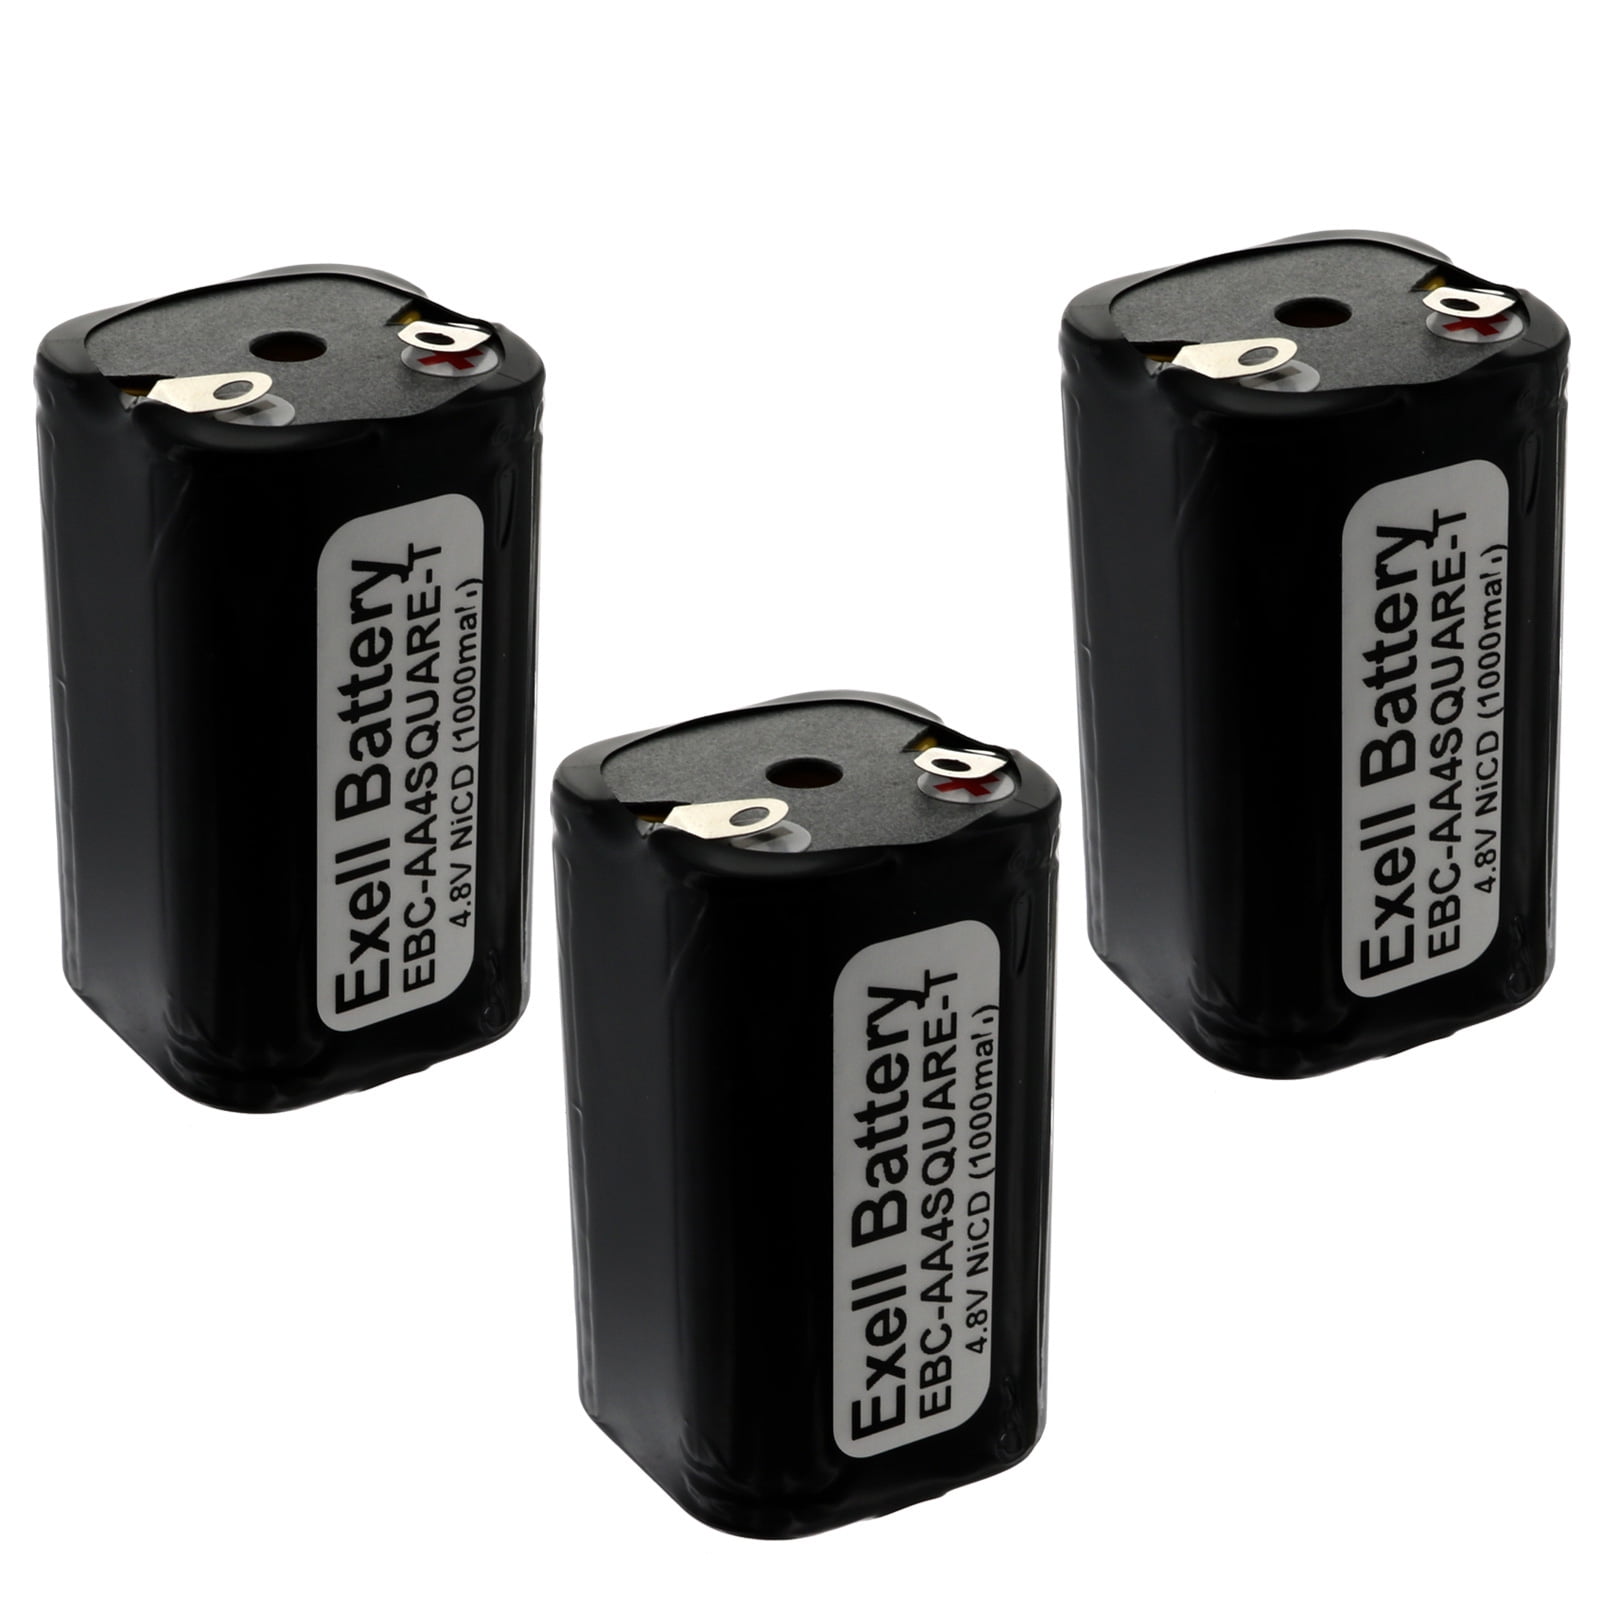 9.6V 2400mAh Ni-cd Rechargeable Battery Cell Pack Tamiya Connector Black S 